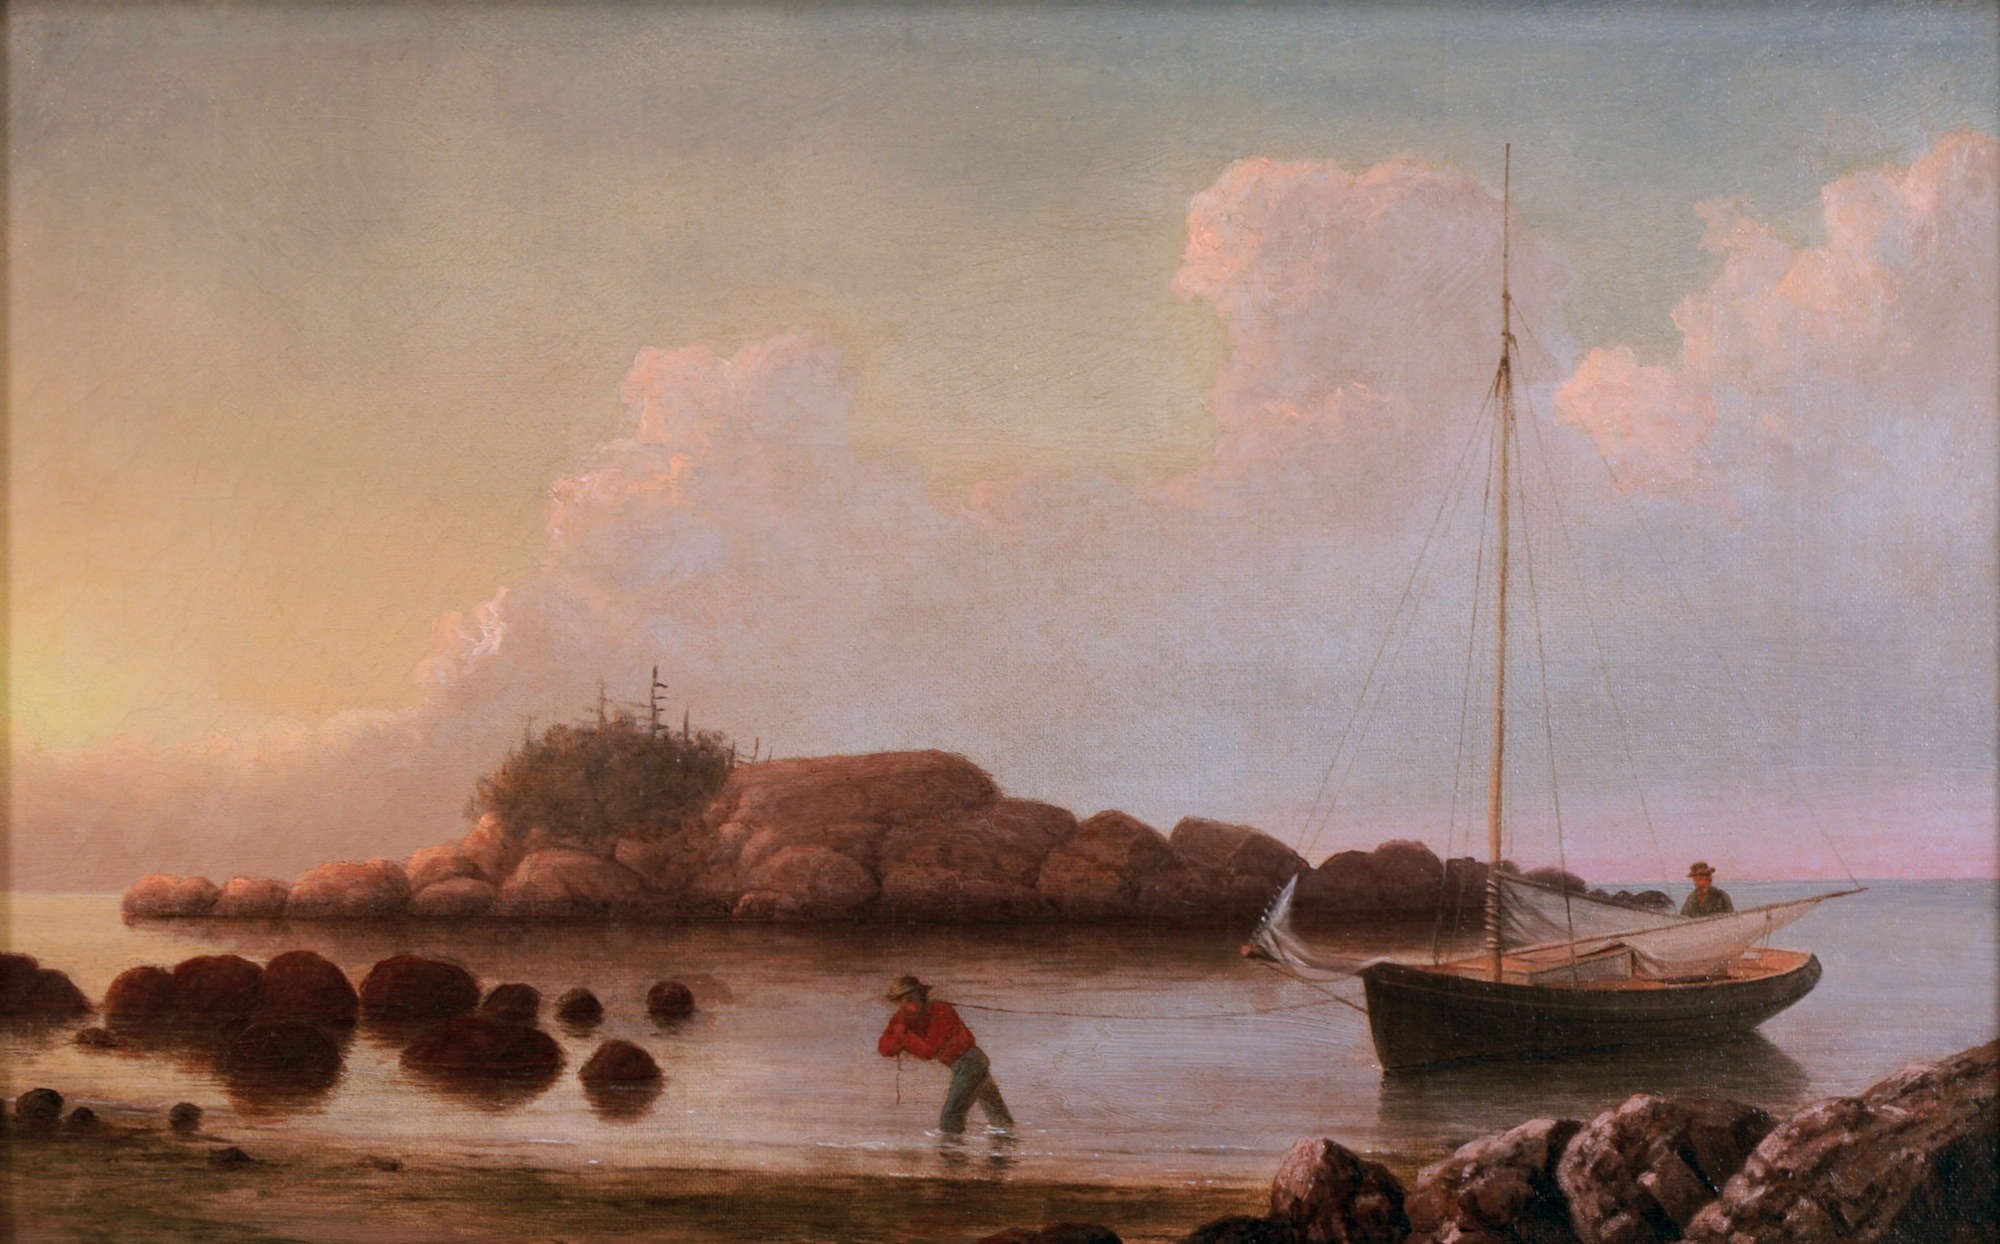 Coming Ashore near Brace's Rock, Gloucester, Massachusetts, c.1860 (inv. 60) 10 x 15 3/4 in. Private collection, On loan to Minnesota Marine Art Museum, Winona, since September 8, 2005.